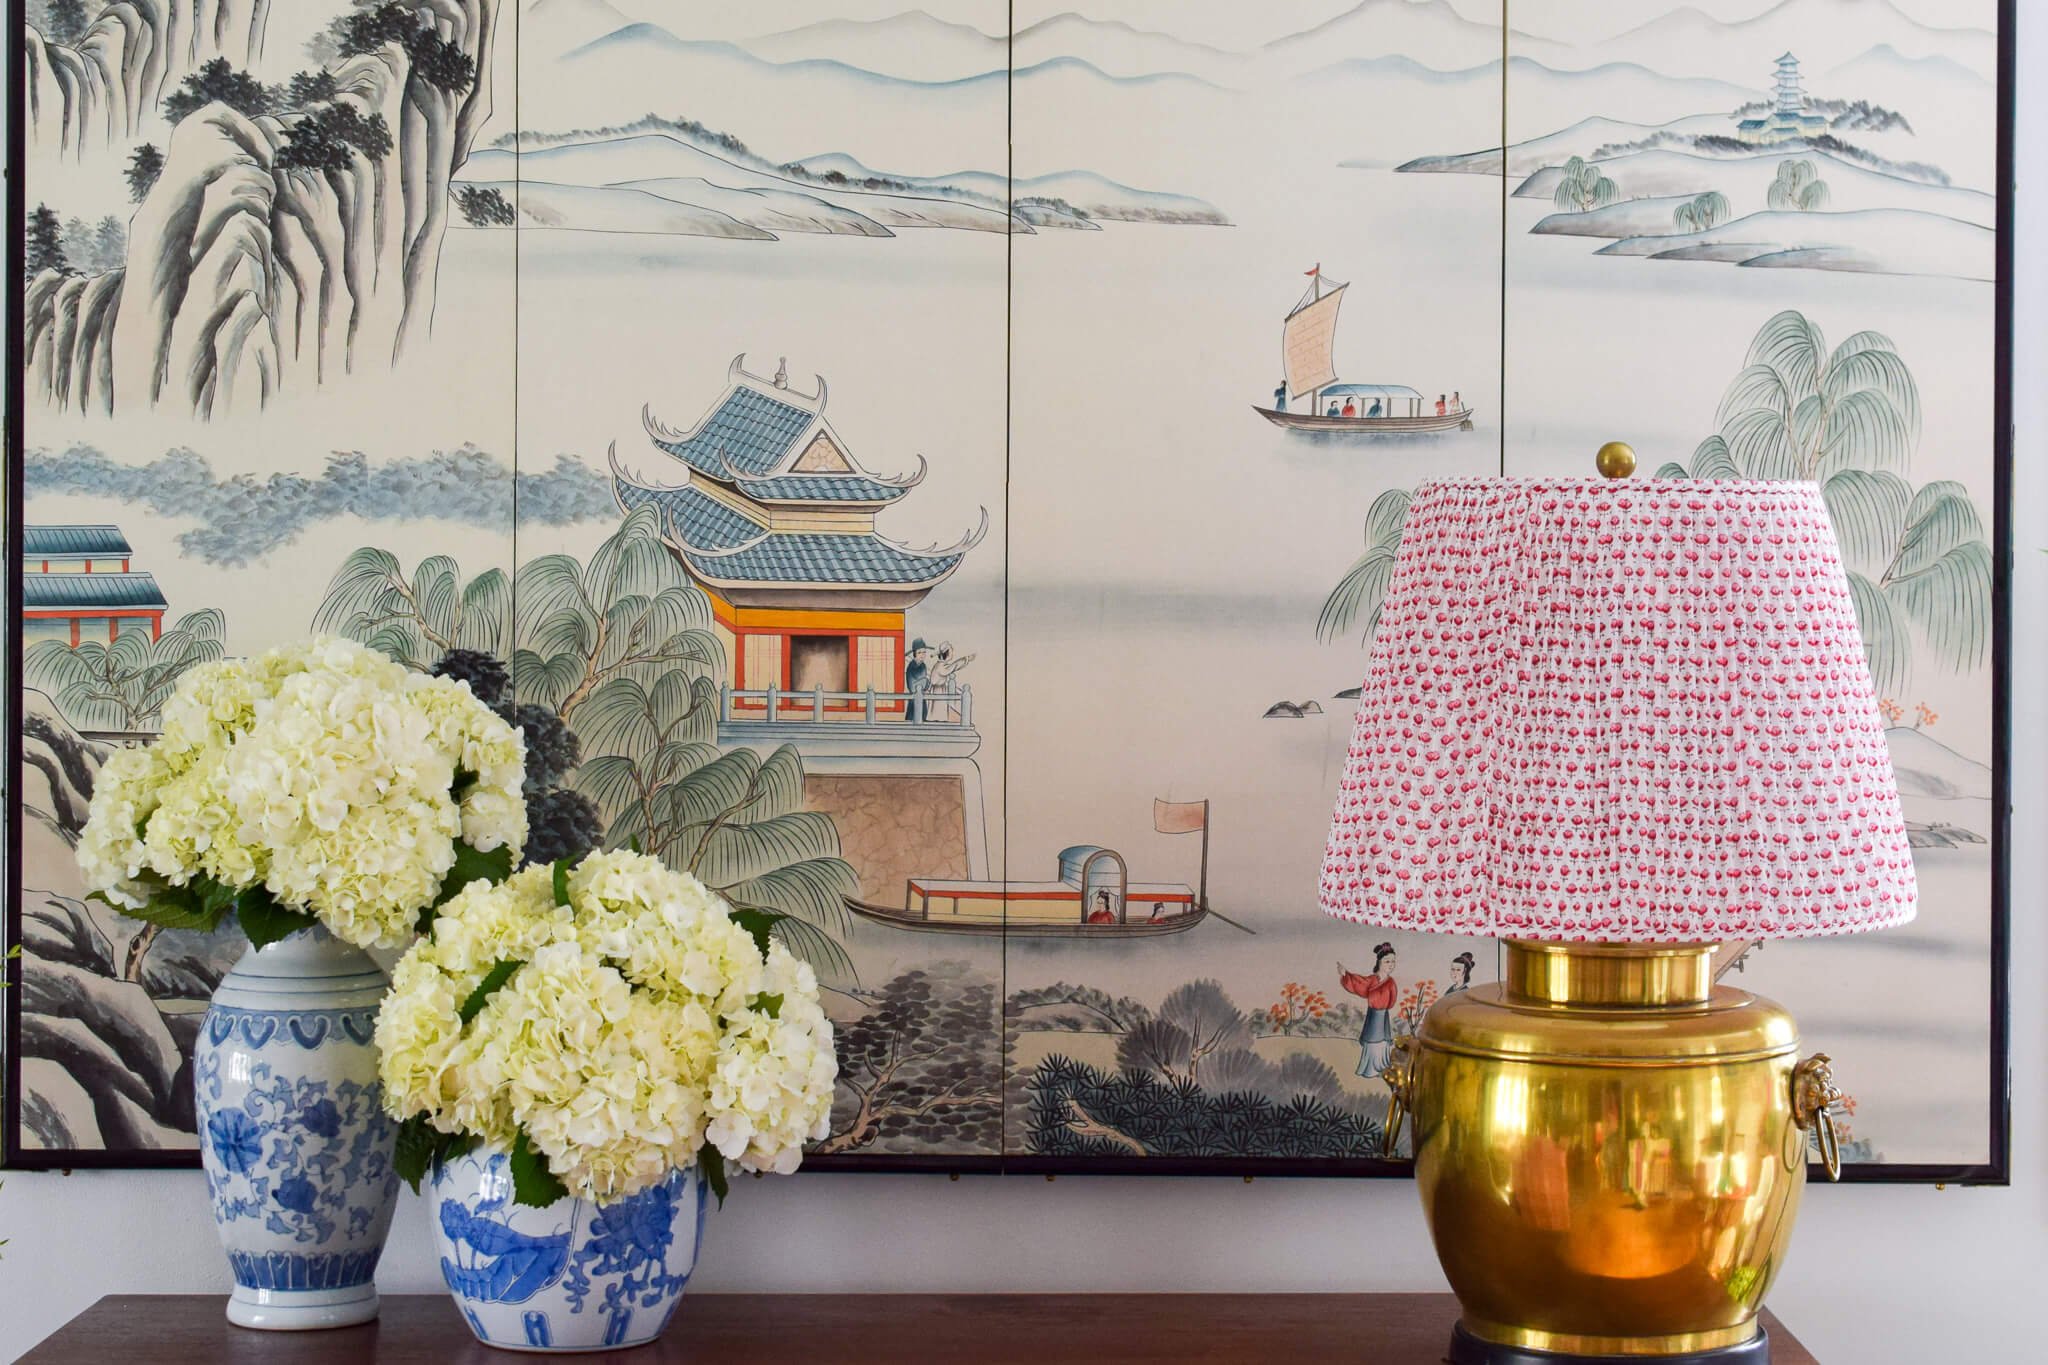 How to Use Vintage Lamps in Your Decor